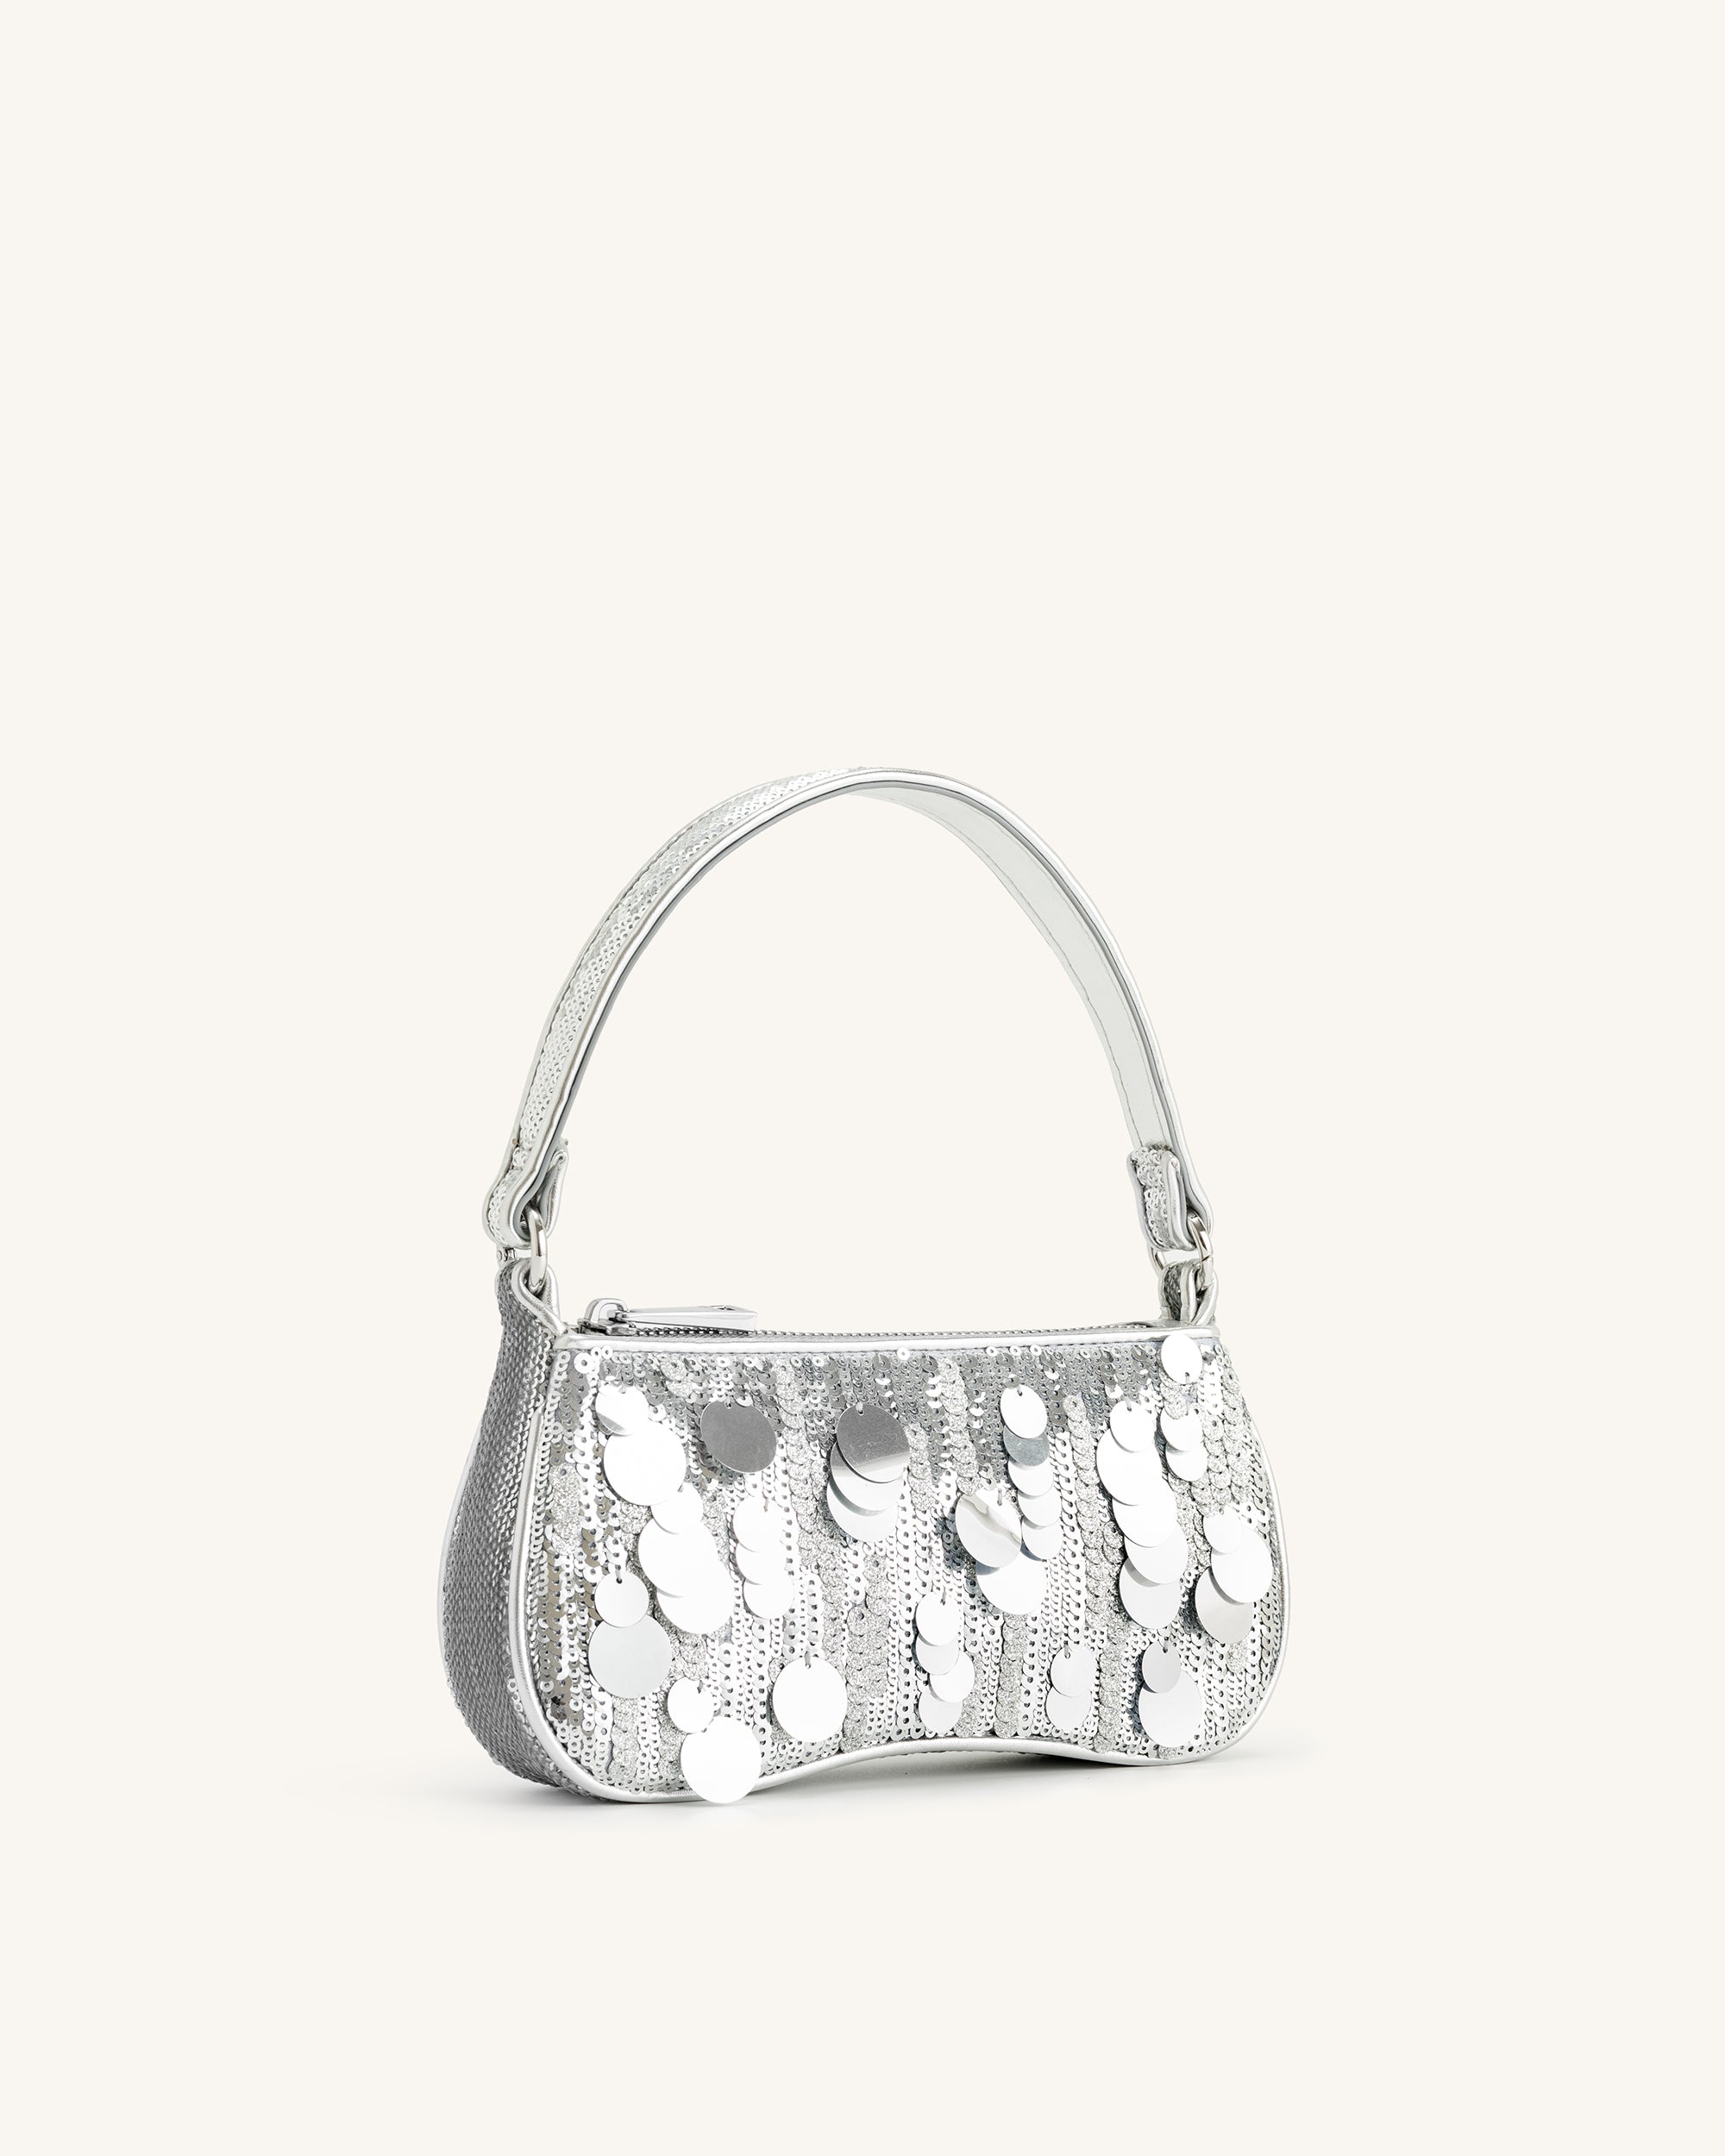 Prada Logo Sequin Tote With Pouch on SALE